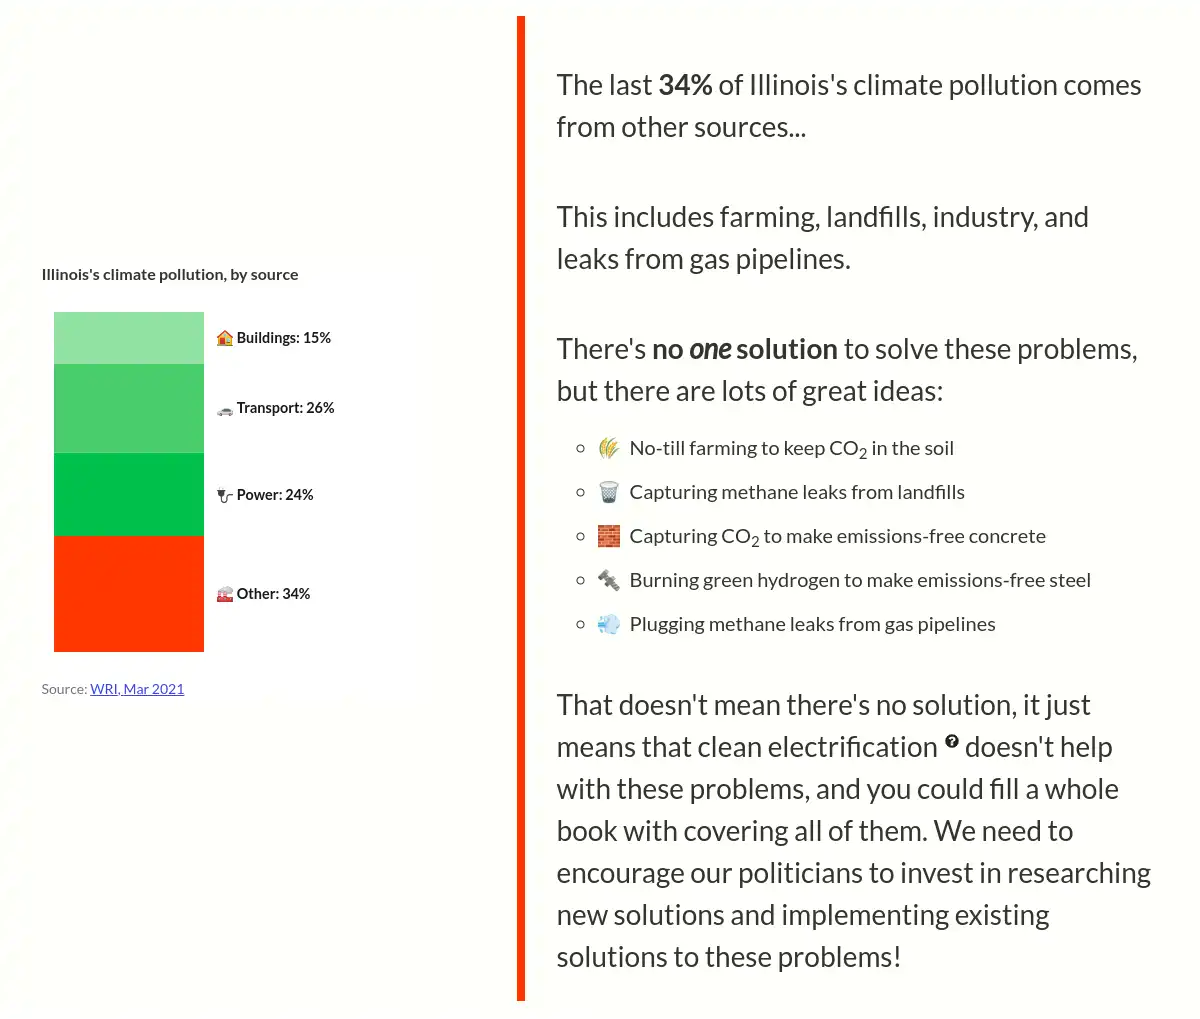 Page showing "Other Emissions" heading with text underneath that says "The last 34% of         emissions in Illinois come form other sources. This includes farming, landfills, industry,         and leaks from gas pipelines. There's no [one italicized] solution to solve these         problems, but there are lots of great ideas:" There is then a list of five ideas with emoji,         followed by the text "That doesn't mean there's no solution, it just means that         clean electrification doesn't help with these problems, and you could fill a whole book         with covering all of them. We need to encourage our politicians to invest in researching new         solutions and implementing existing solutions to these problems!